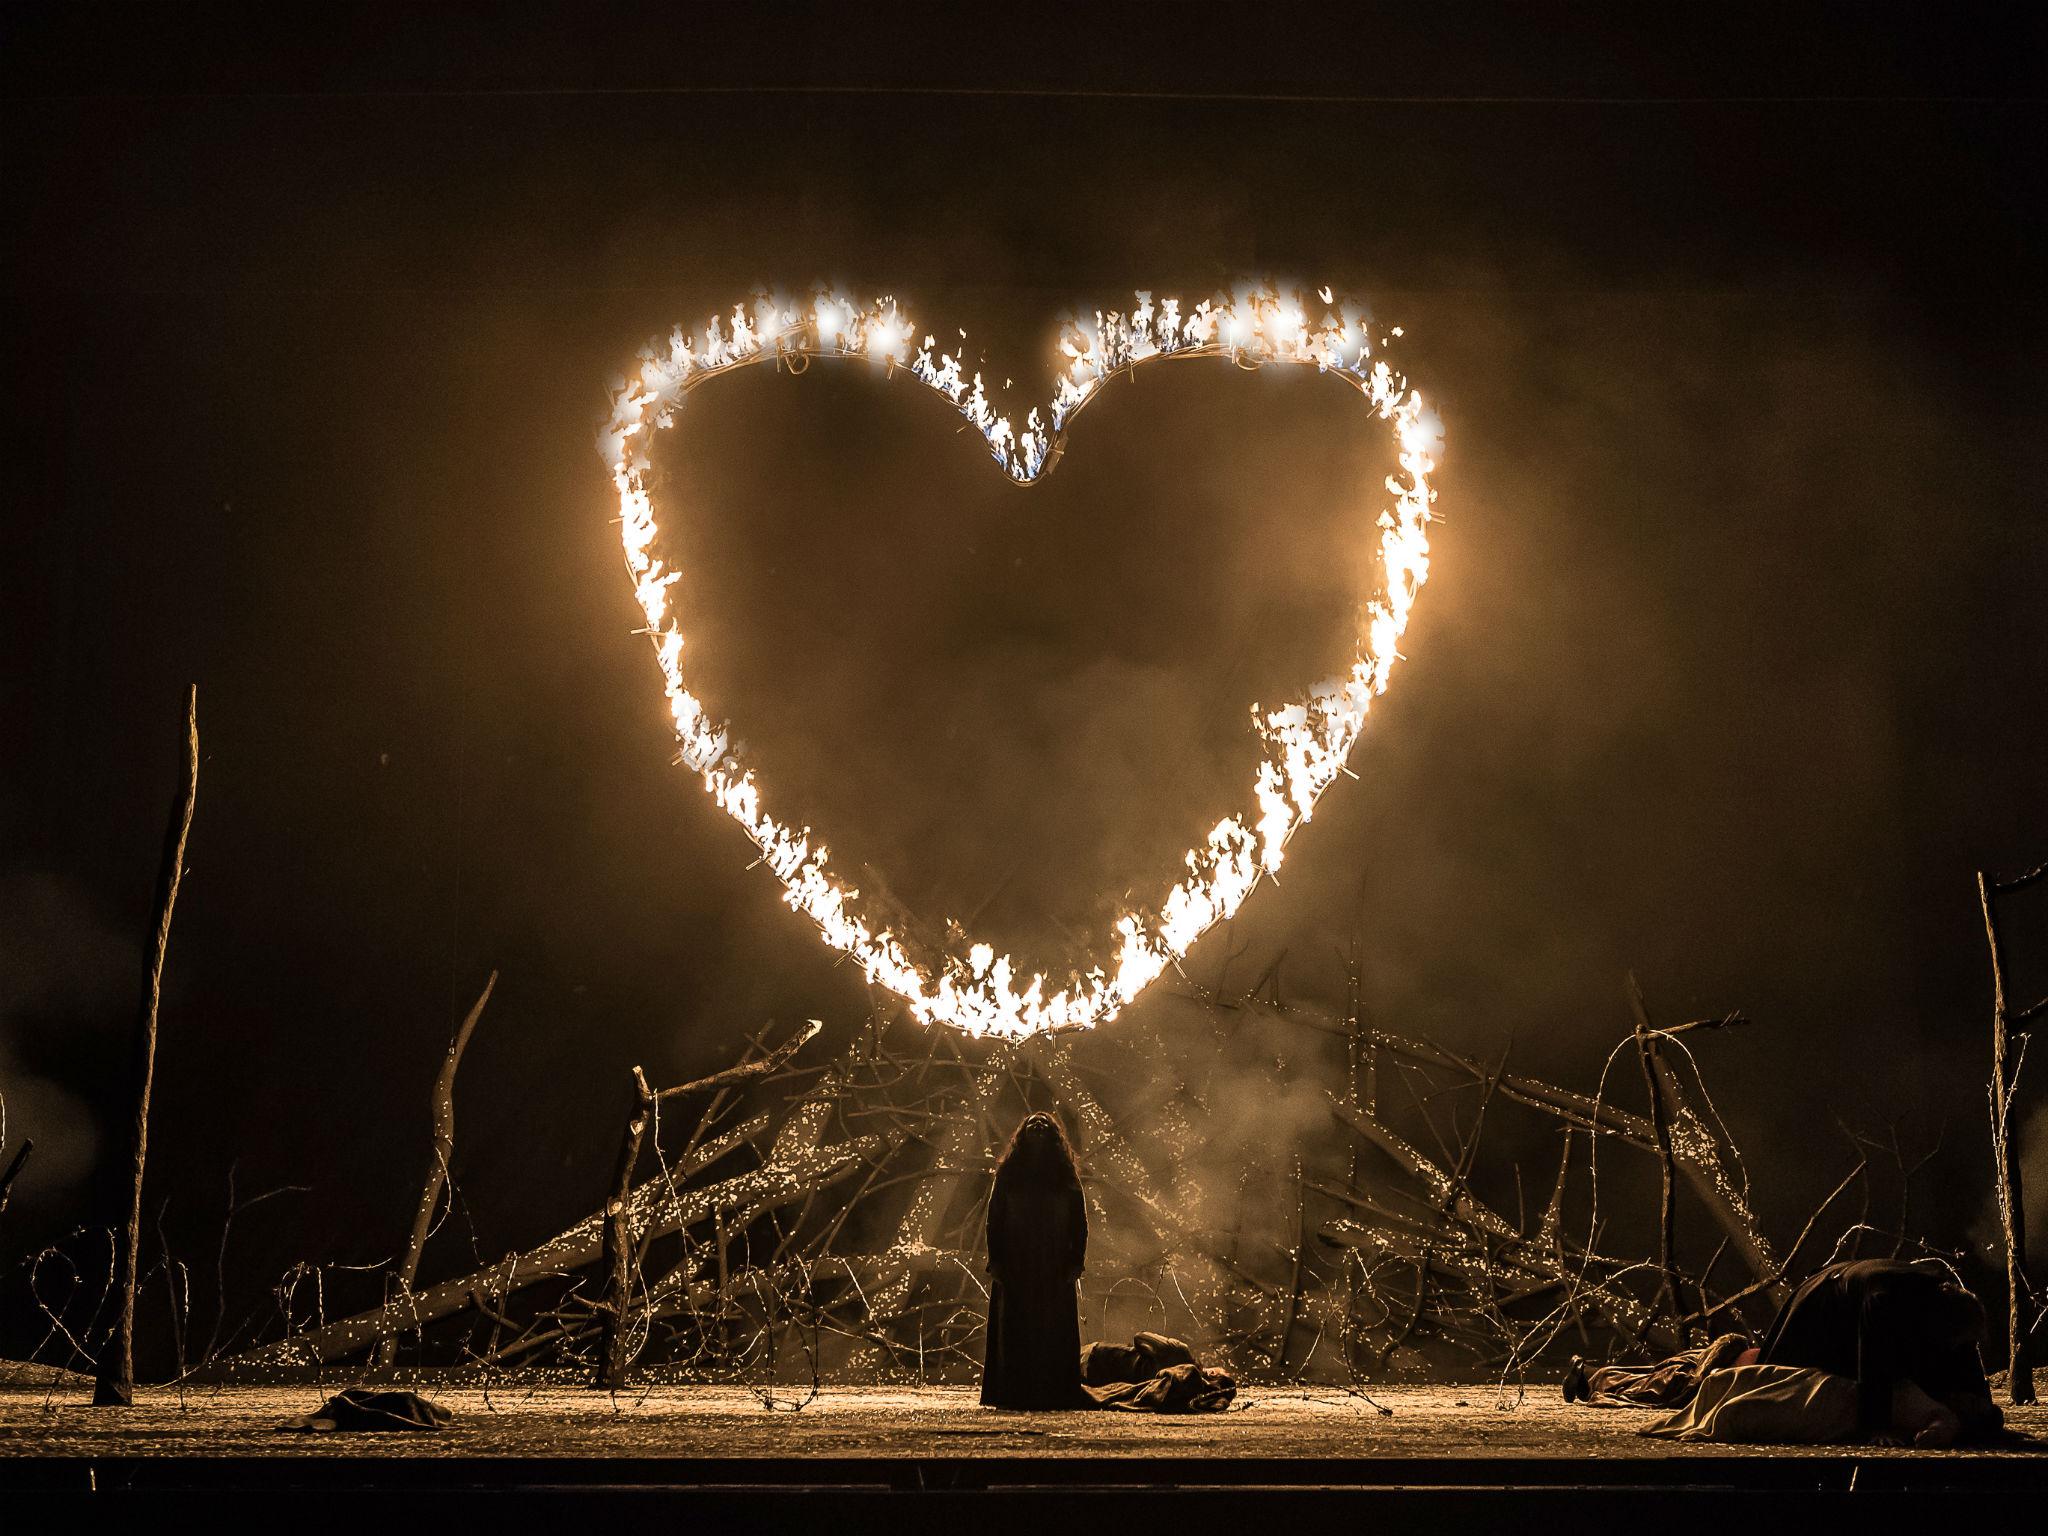 A scene from Il Trovatore at the Royal Opera House